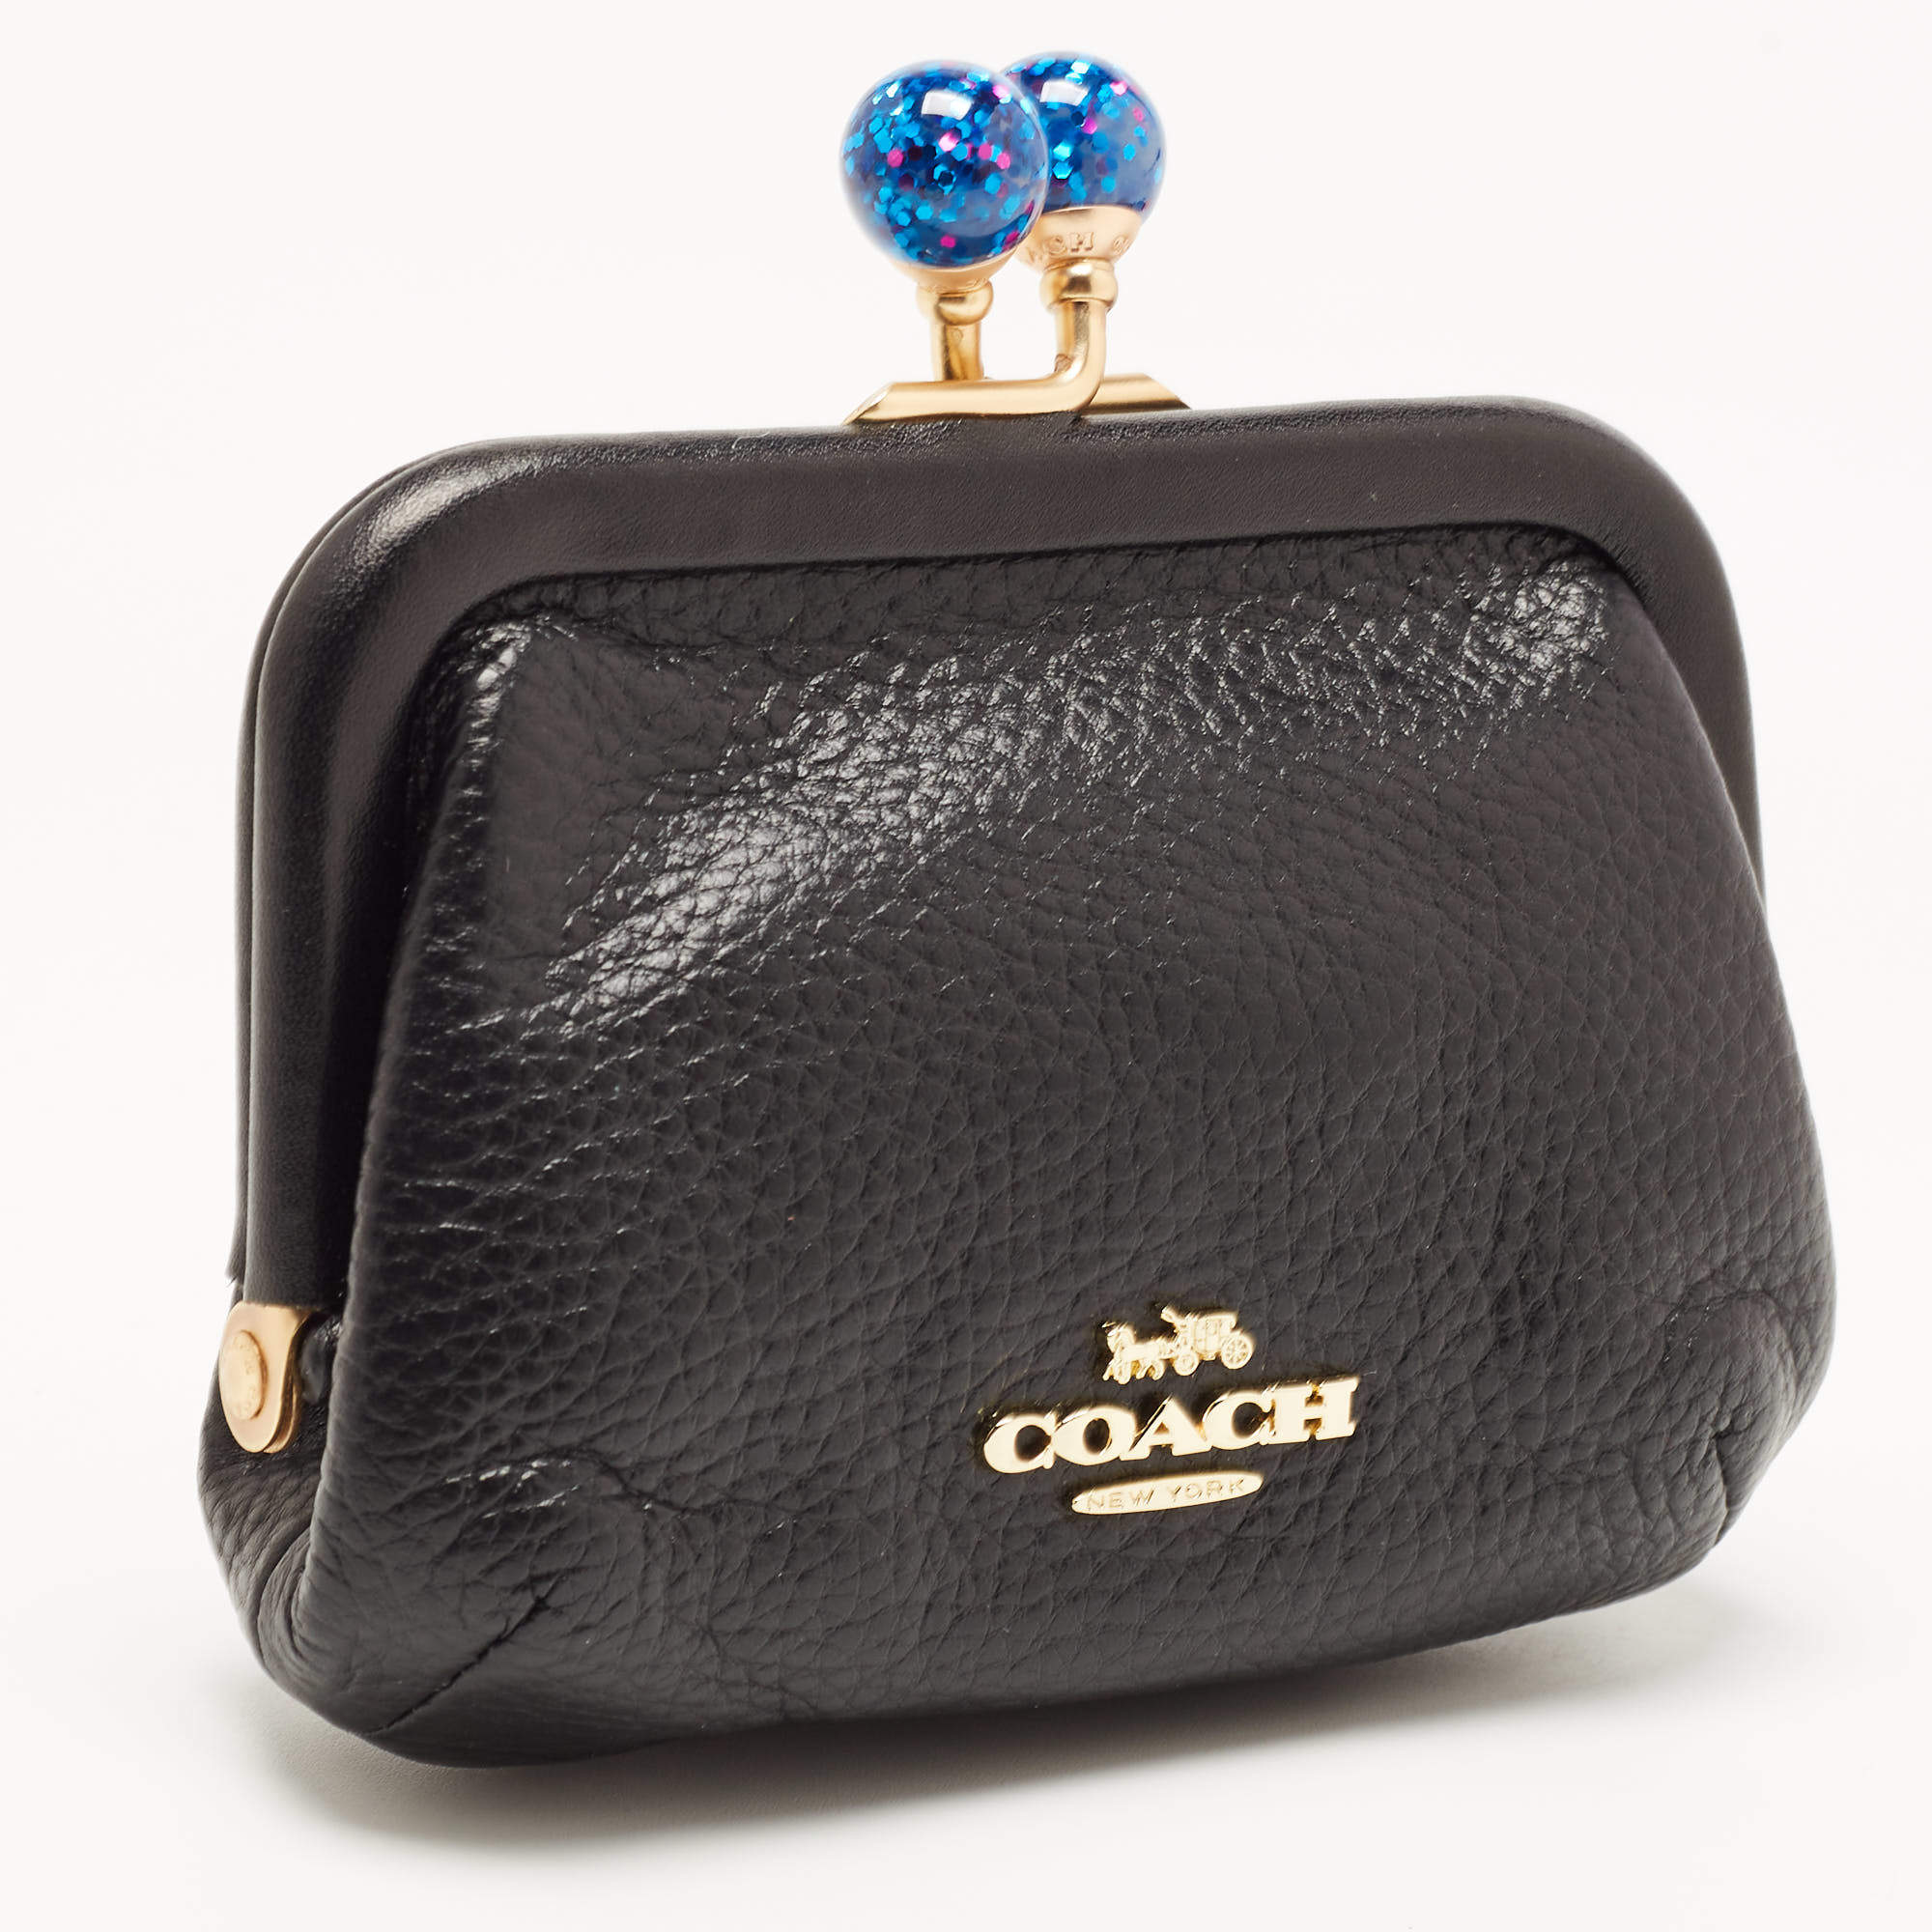 COACH VINTAGE BLACK LEATHER KISS-LOCK COIN POUCH | eBay